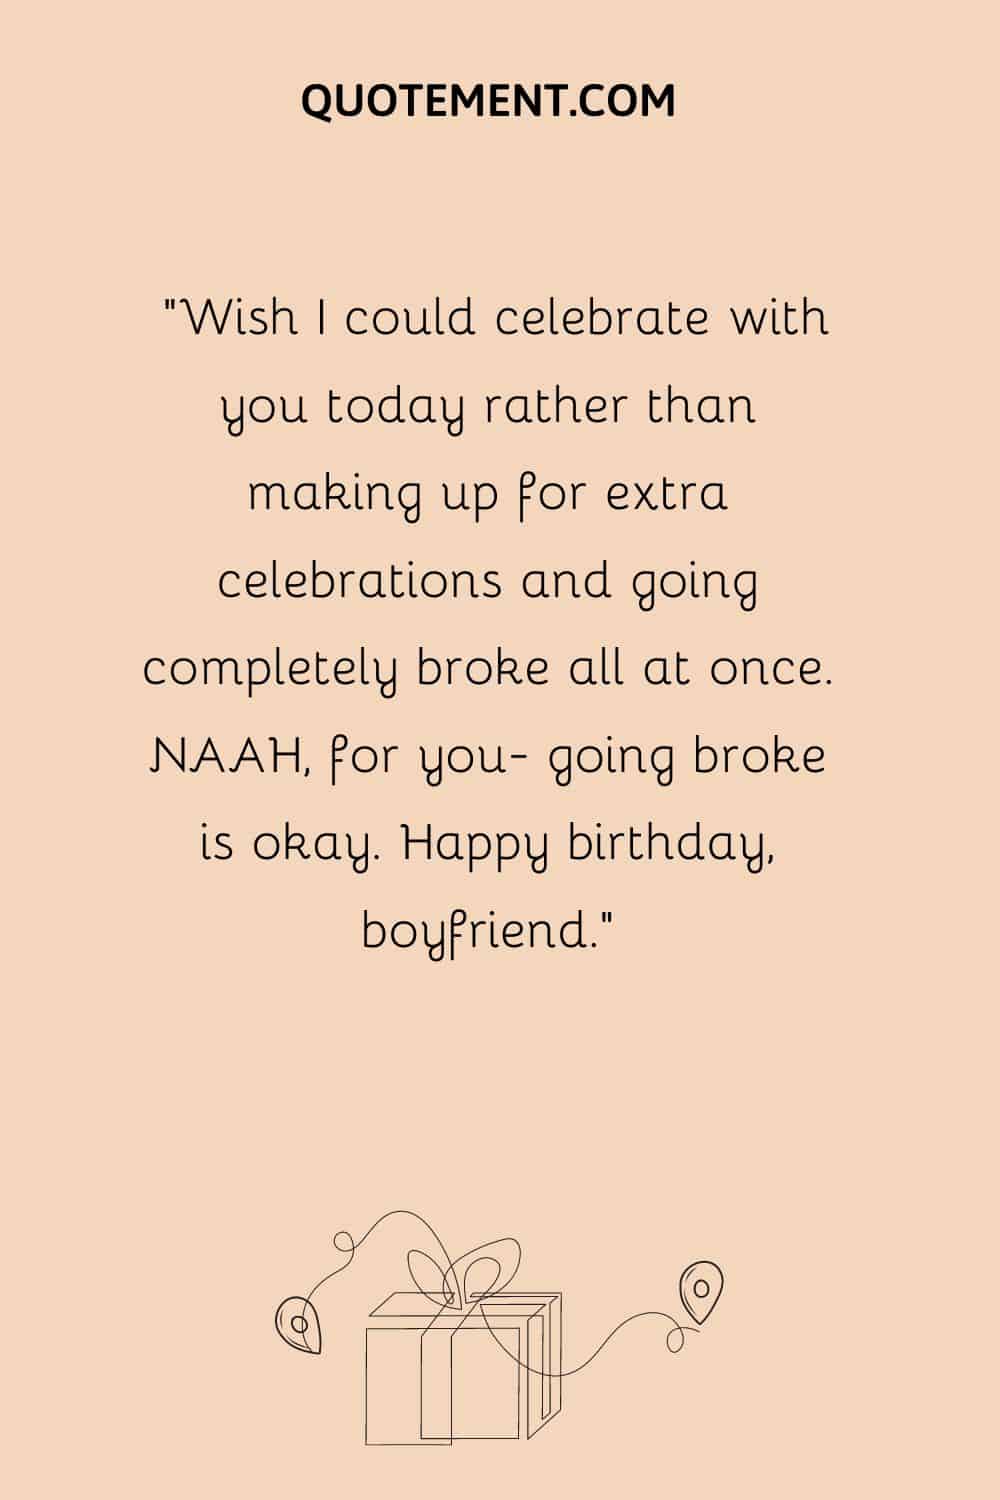 “Wish I could celebrate with you today rather than making up for extra celebrations and going completely broke all at once. NAAH, for you- going broke is okay. Happy birthday, boyfriend.”